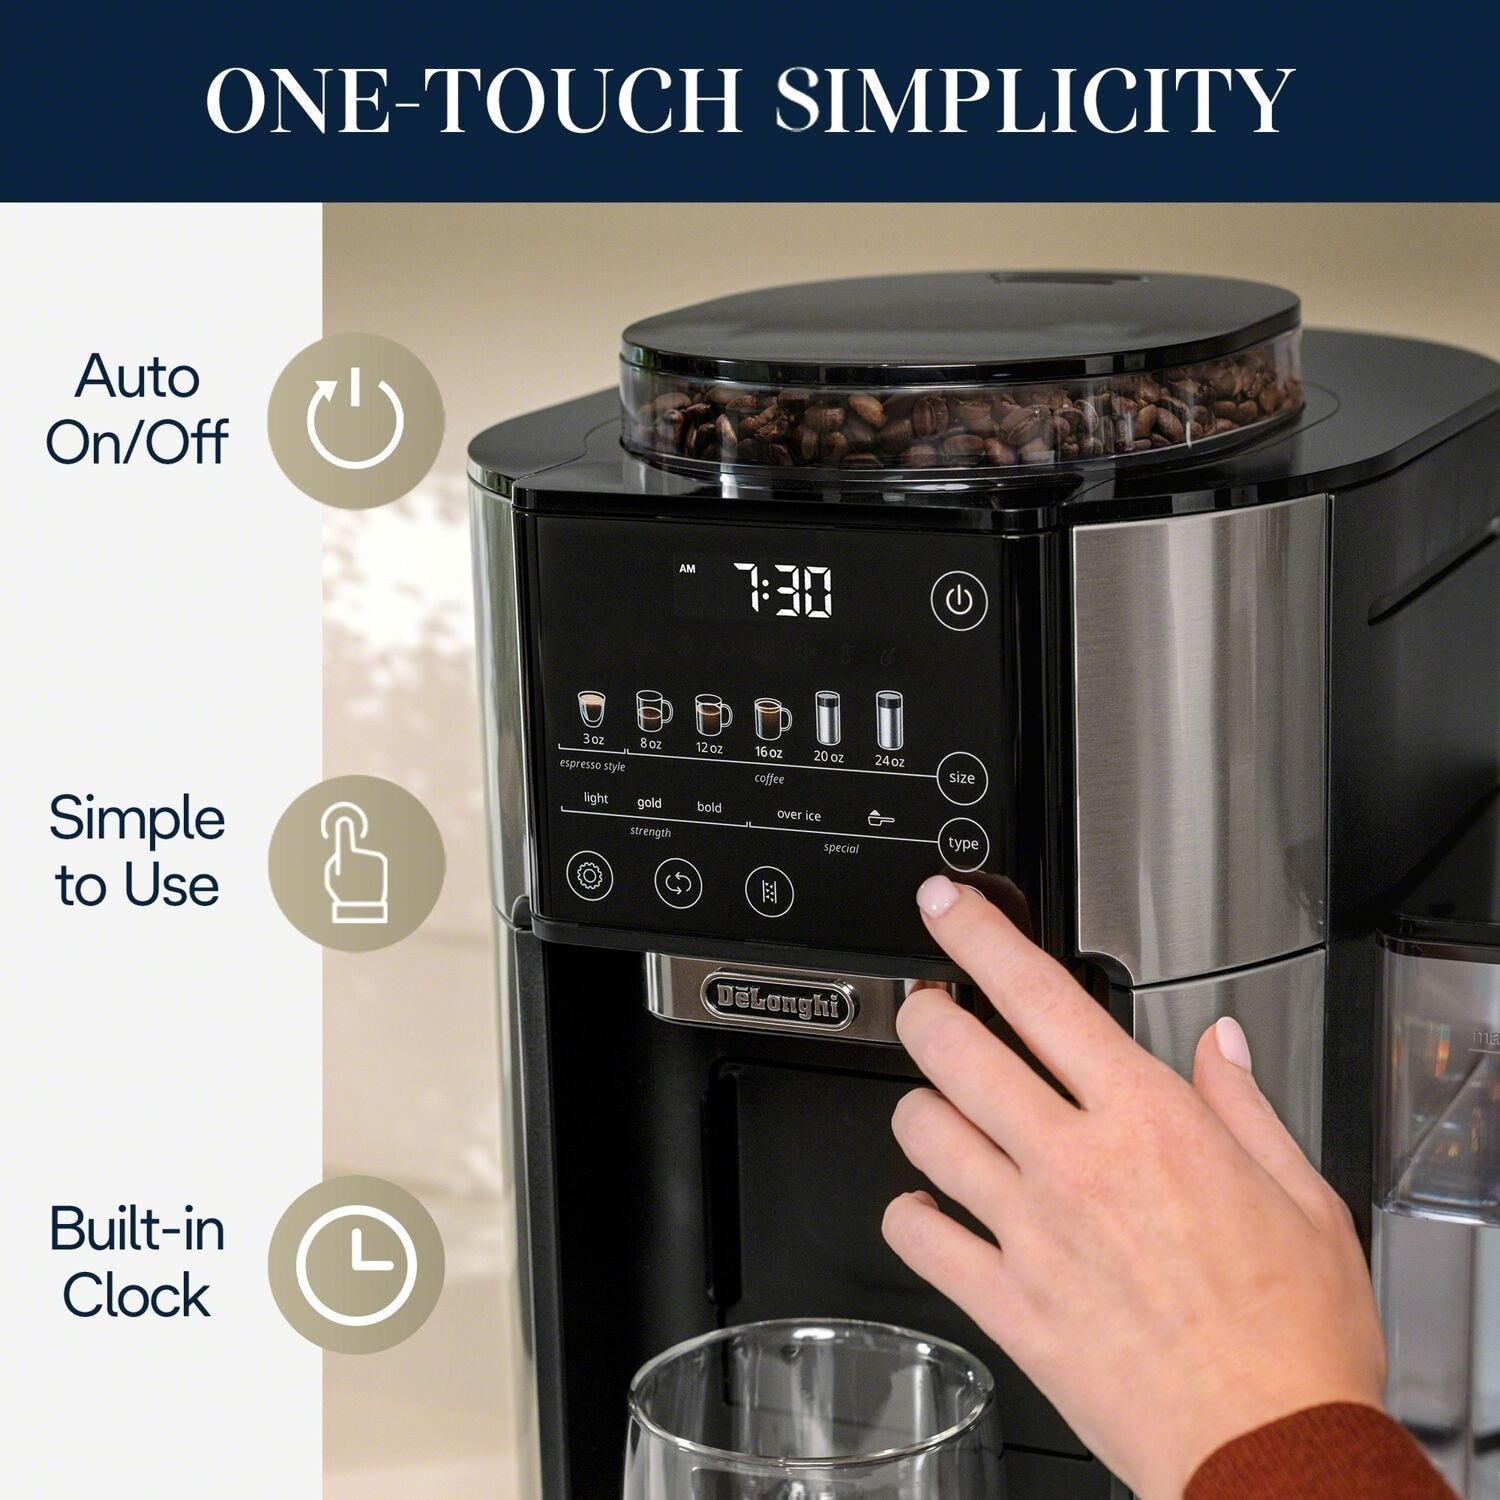 https://ak1.ostkcdn.com/images/products/is/images/direct/07bcb38fdd40ecb7b602cc8fa507f4e5fc77bbb3/DeLonghi-TrueBrew-Automatic-Single-Serve-Drip-Coffee-Maker-with-Built-In-Grinder-and-Bean-Extract-Technology.jpg